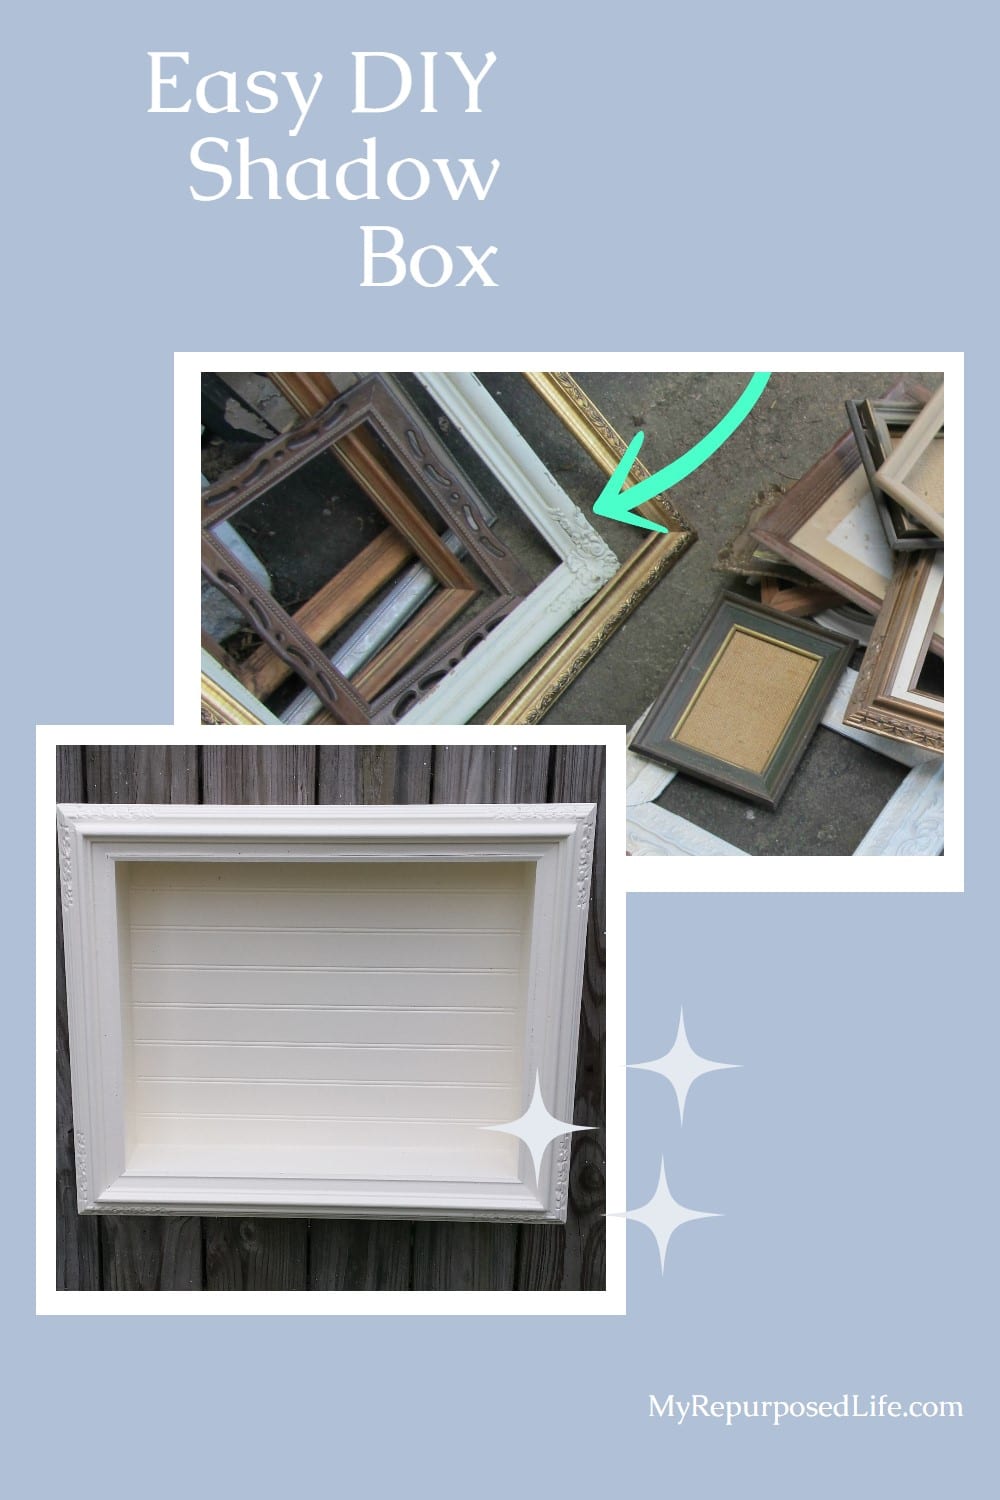 Step by step directions on how to make an easy shadow box out of a thrift store picture frame. The possibilities are endless. #myrepurposedlife #repurposed #pictureframe #shadowbox #diy #easy #project via @repurposedlife